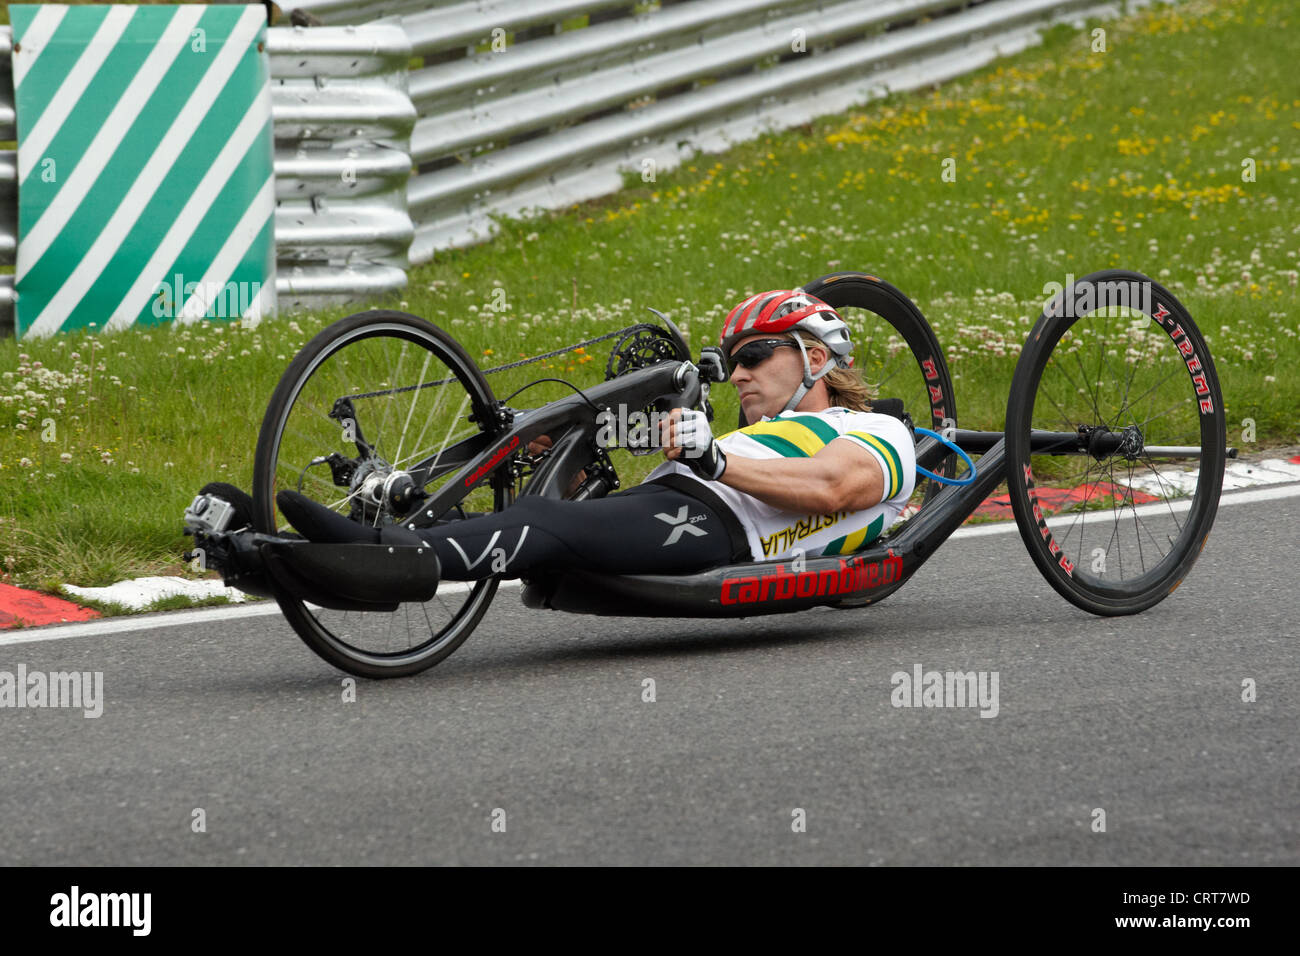 Paralymics London 2012. Pre games paracycling training day at Brands Hatch motor racing circuit, Kent. Stock Photo